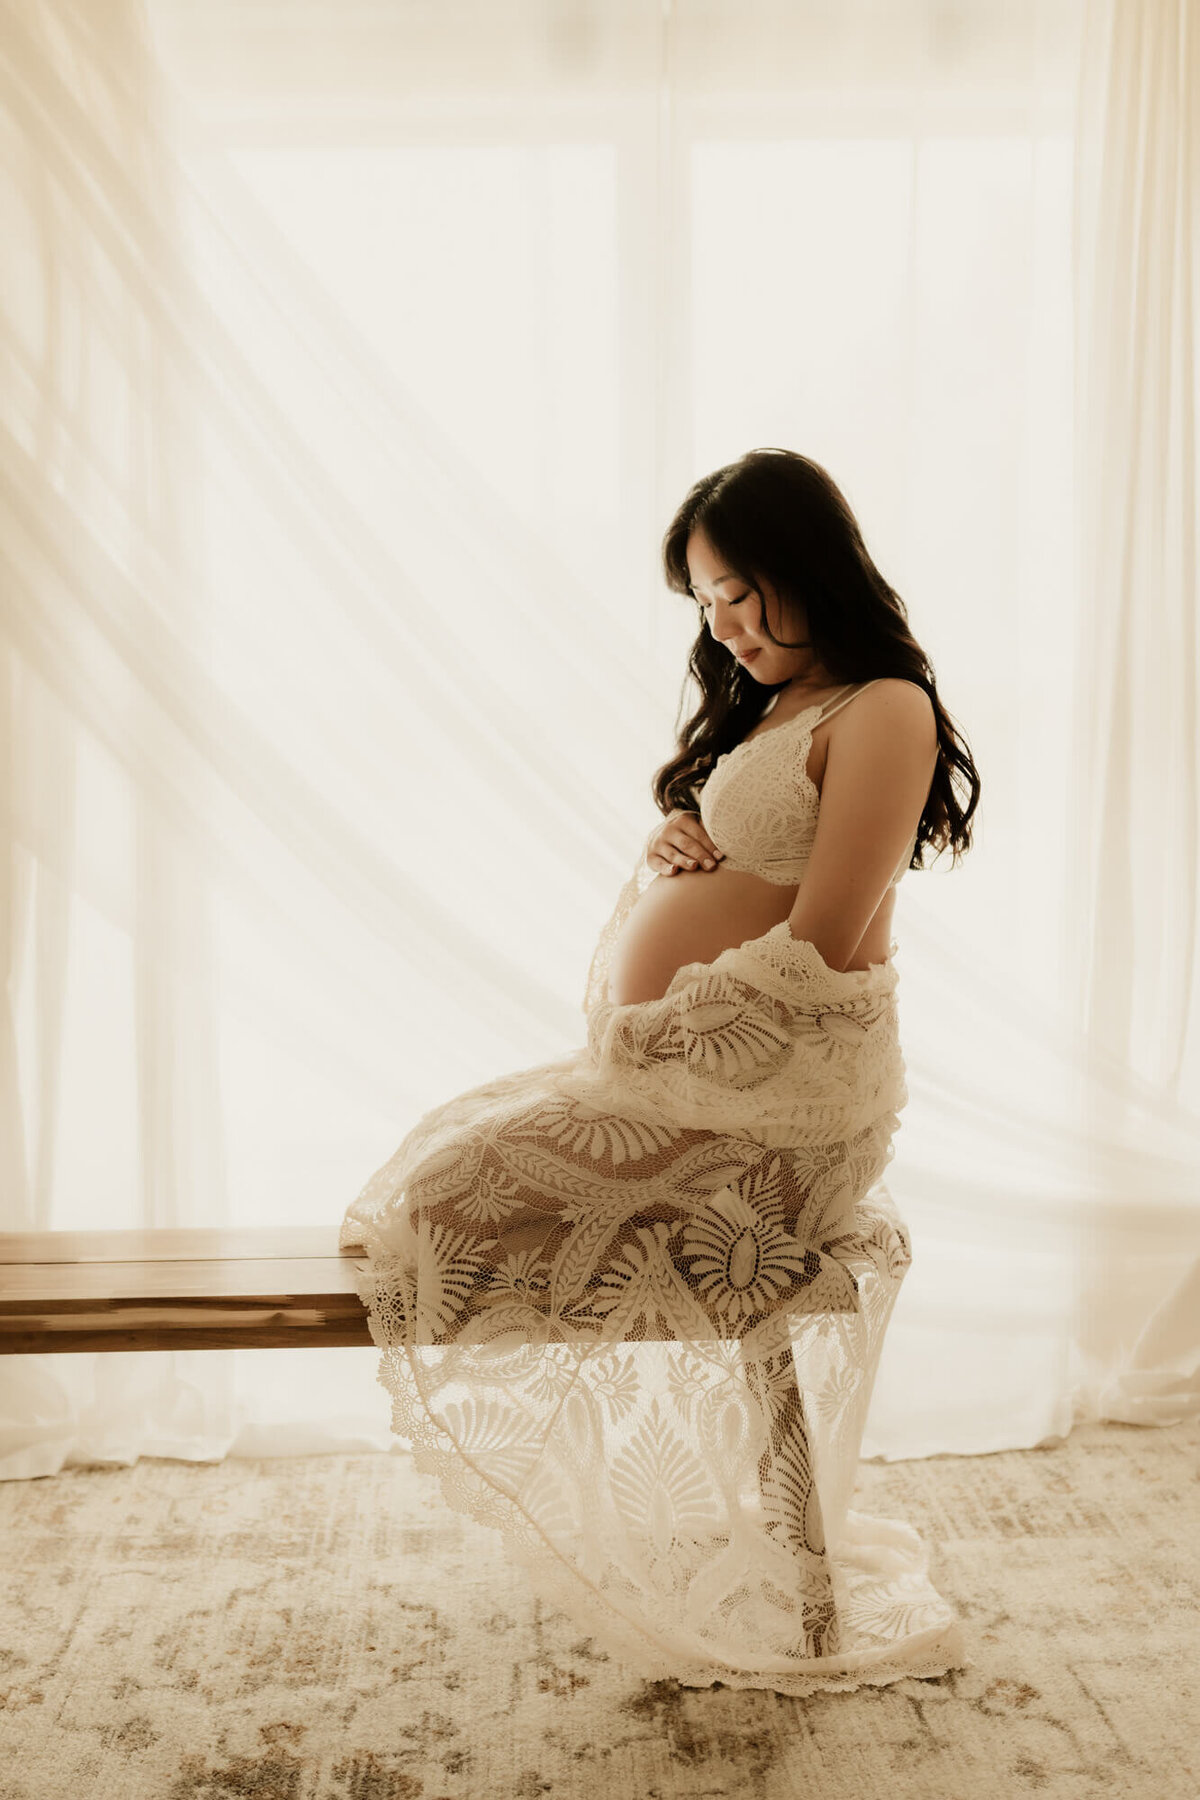 Expecting mother kneeling on a bench and wearing a lace bralette and kimono.